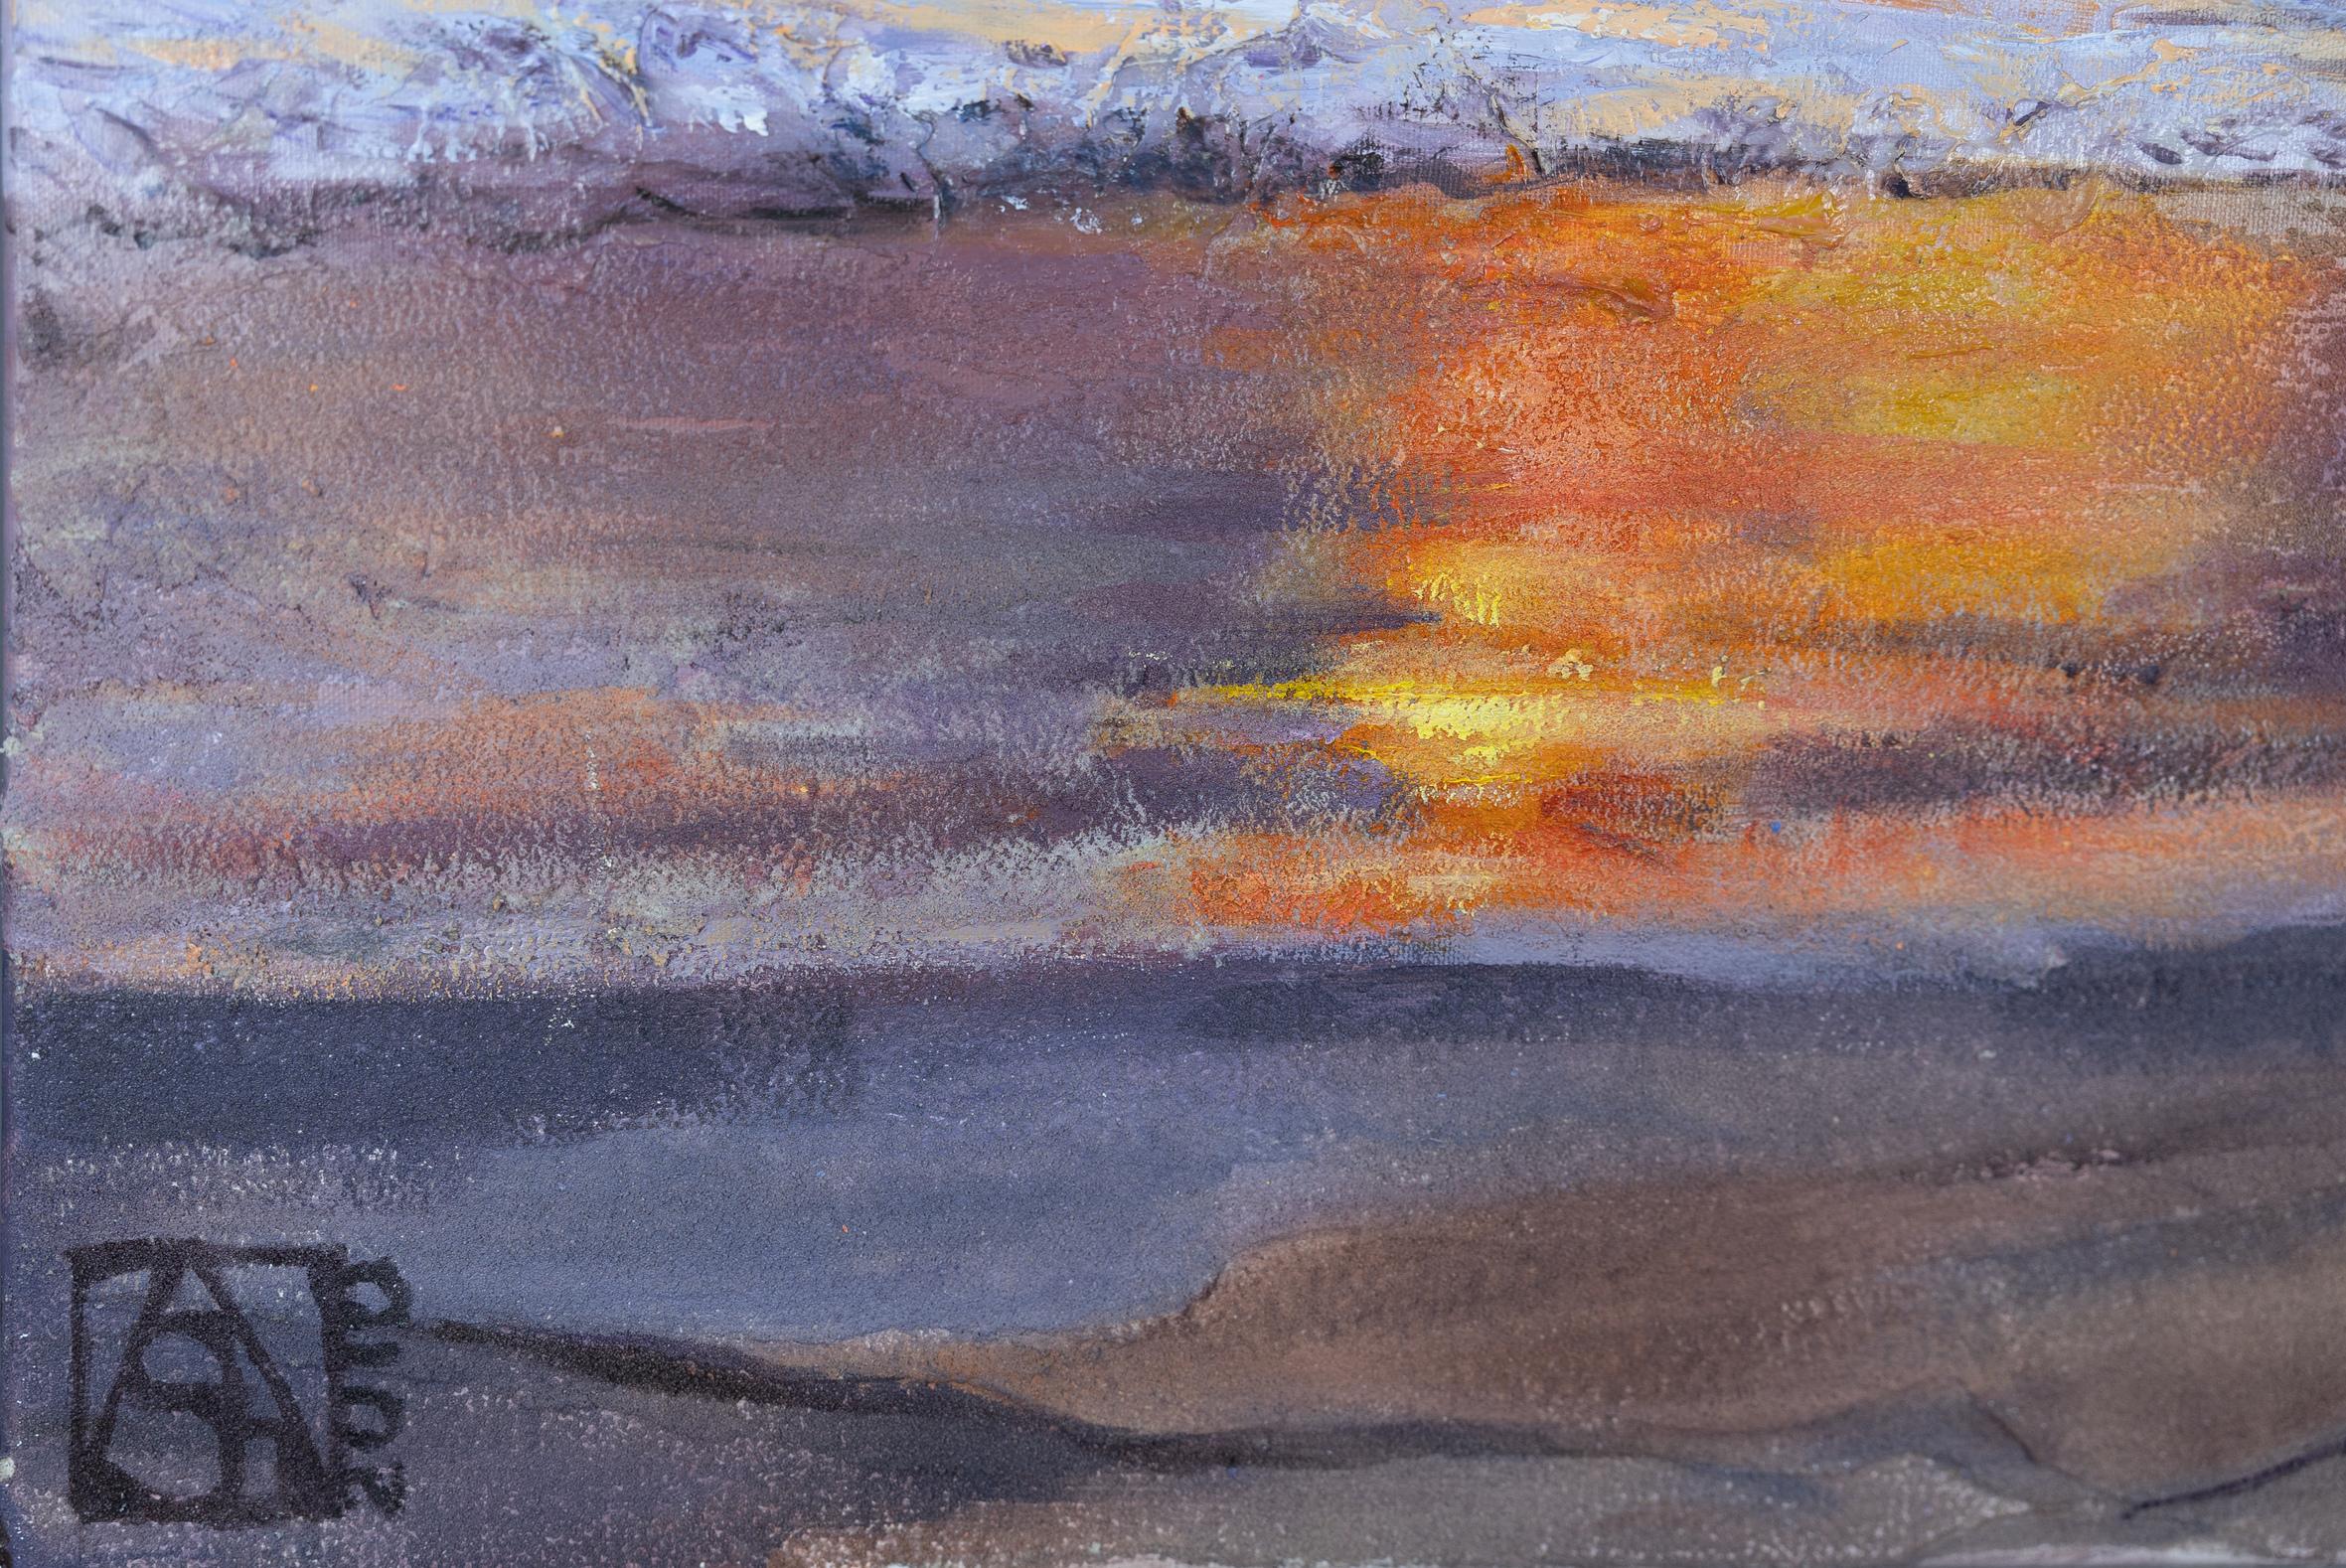 Sunset on the Anse Intendance Beach - Brown Landscape Painting by Anna Shesterikova